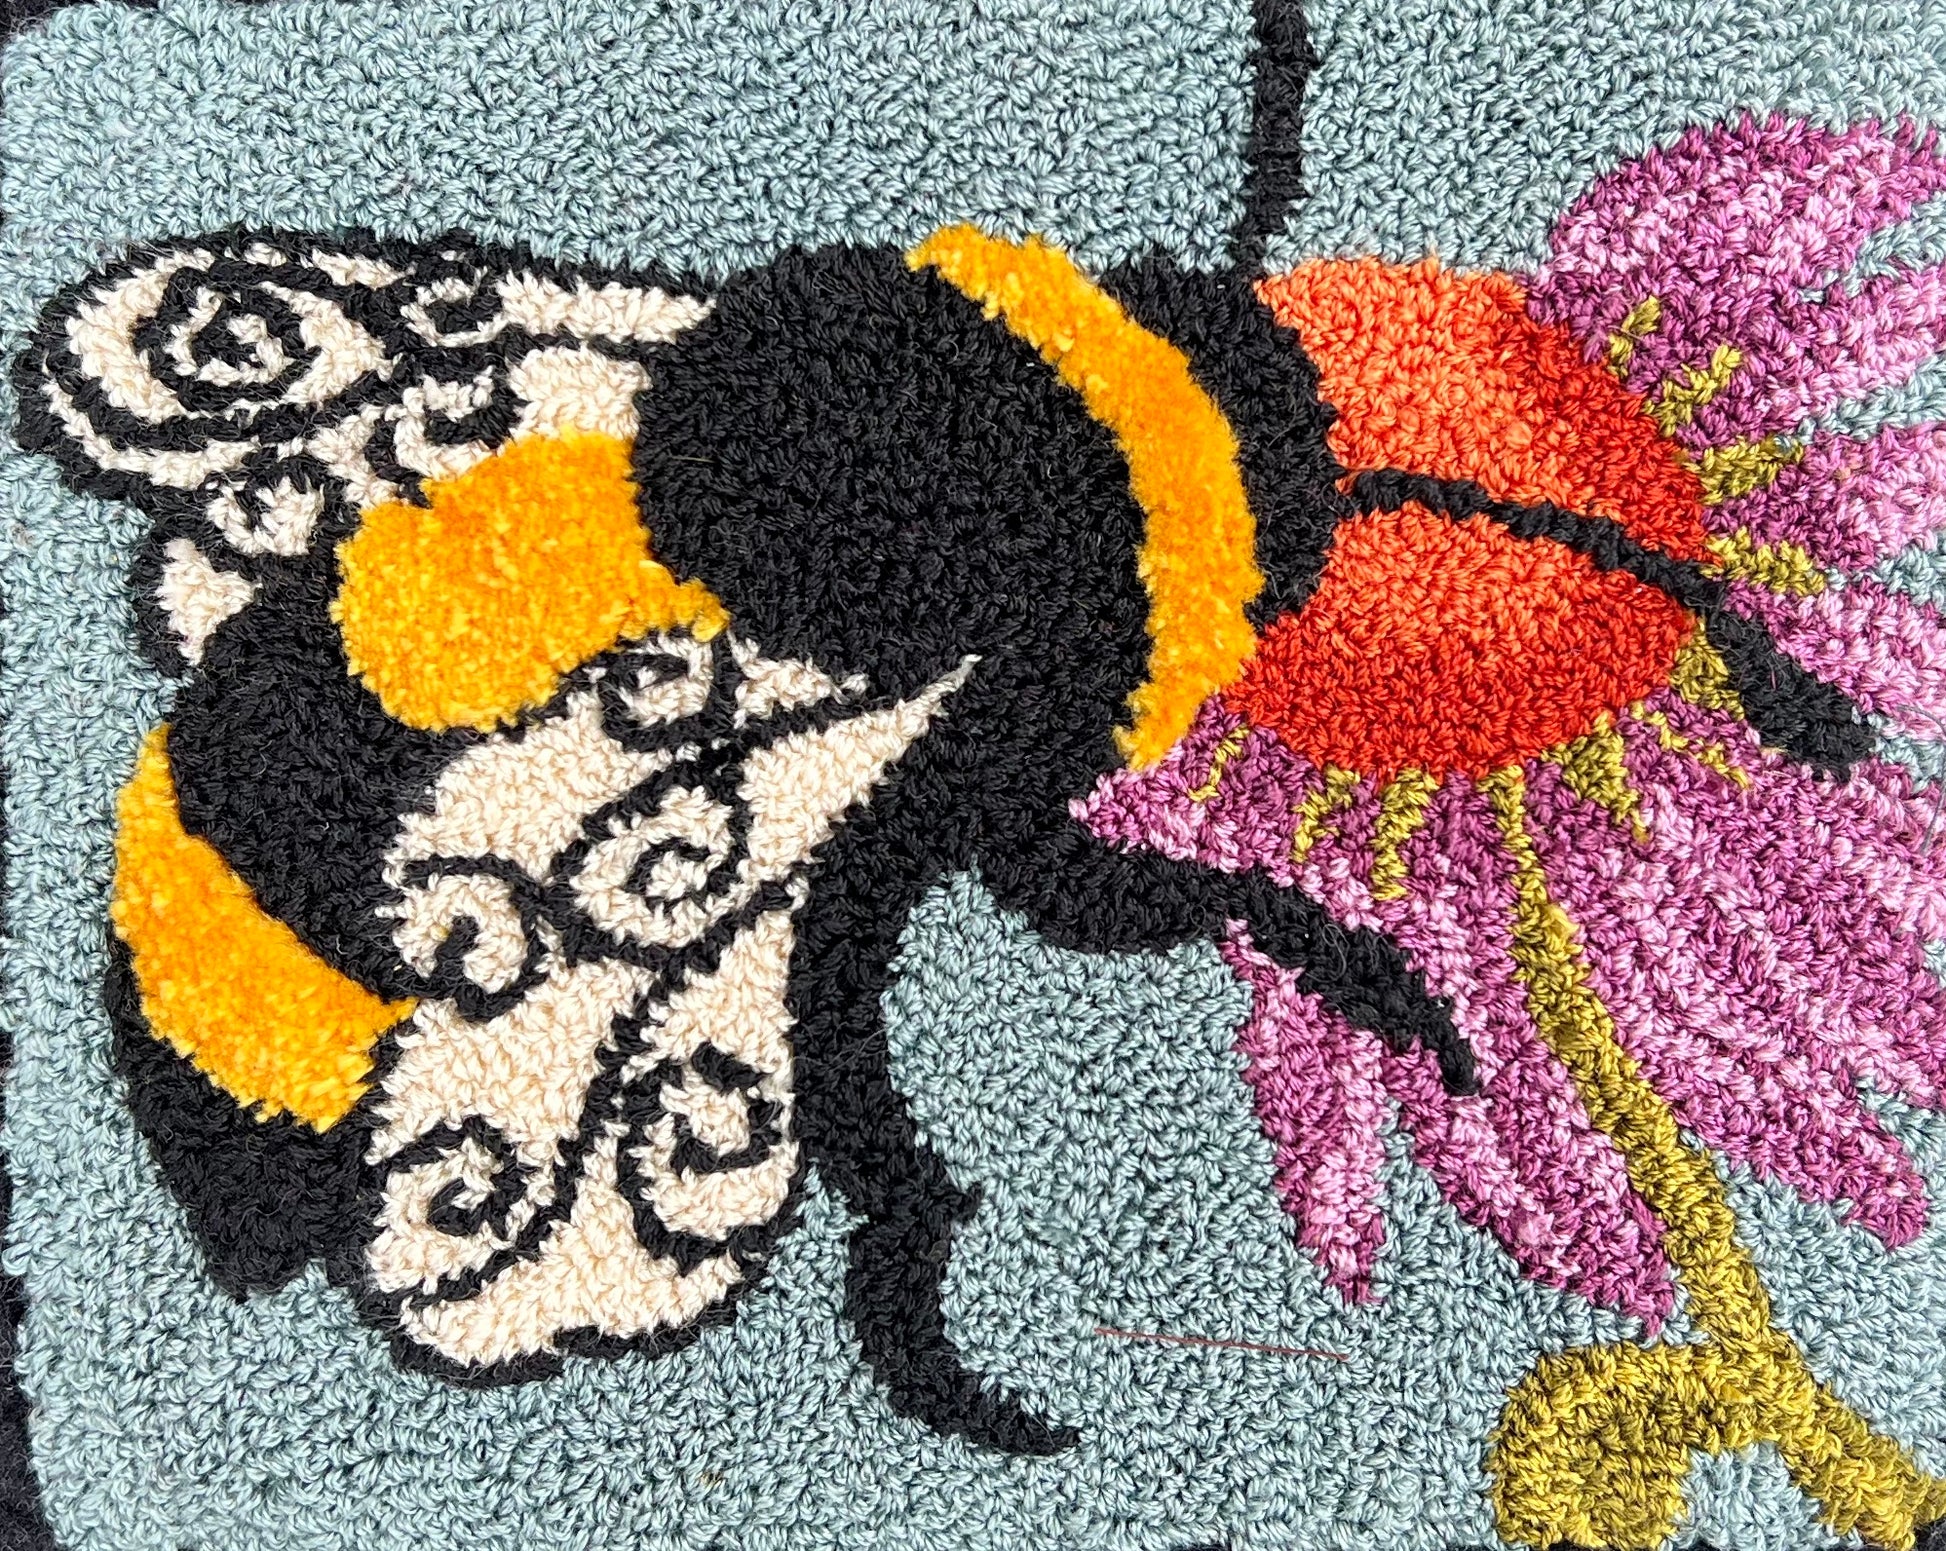  A Bee's Kiss- Paper Rug Hooking Pattern, by Orphaned Wool, Copyright © 2023 Kelly Kanyok. This is a beautifully designed pattern of a bumblebee feeding from a colorful flower. Paper patterns are designed for enlargement.